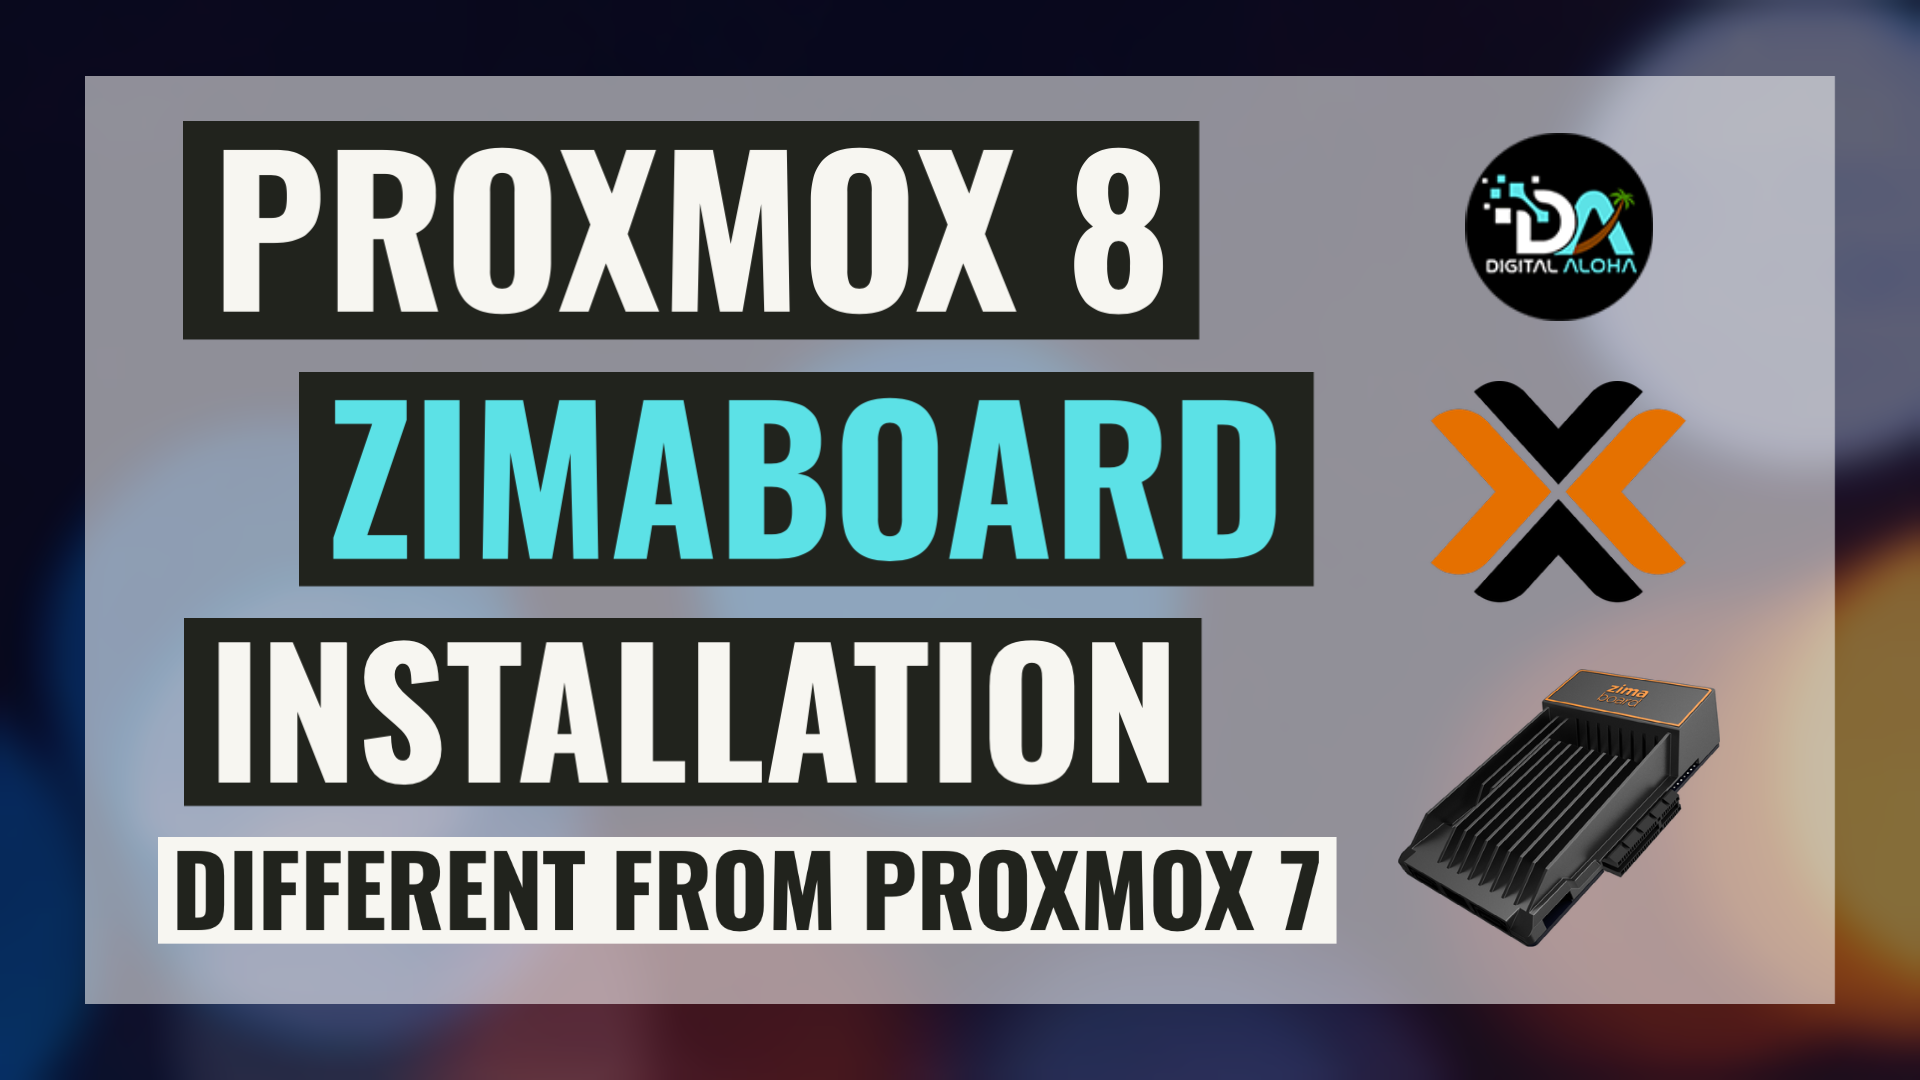 UPDATED GUIDE – Install PROXMOX 8 On A Zimaboard On Its Internal eMMC Storage